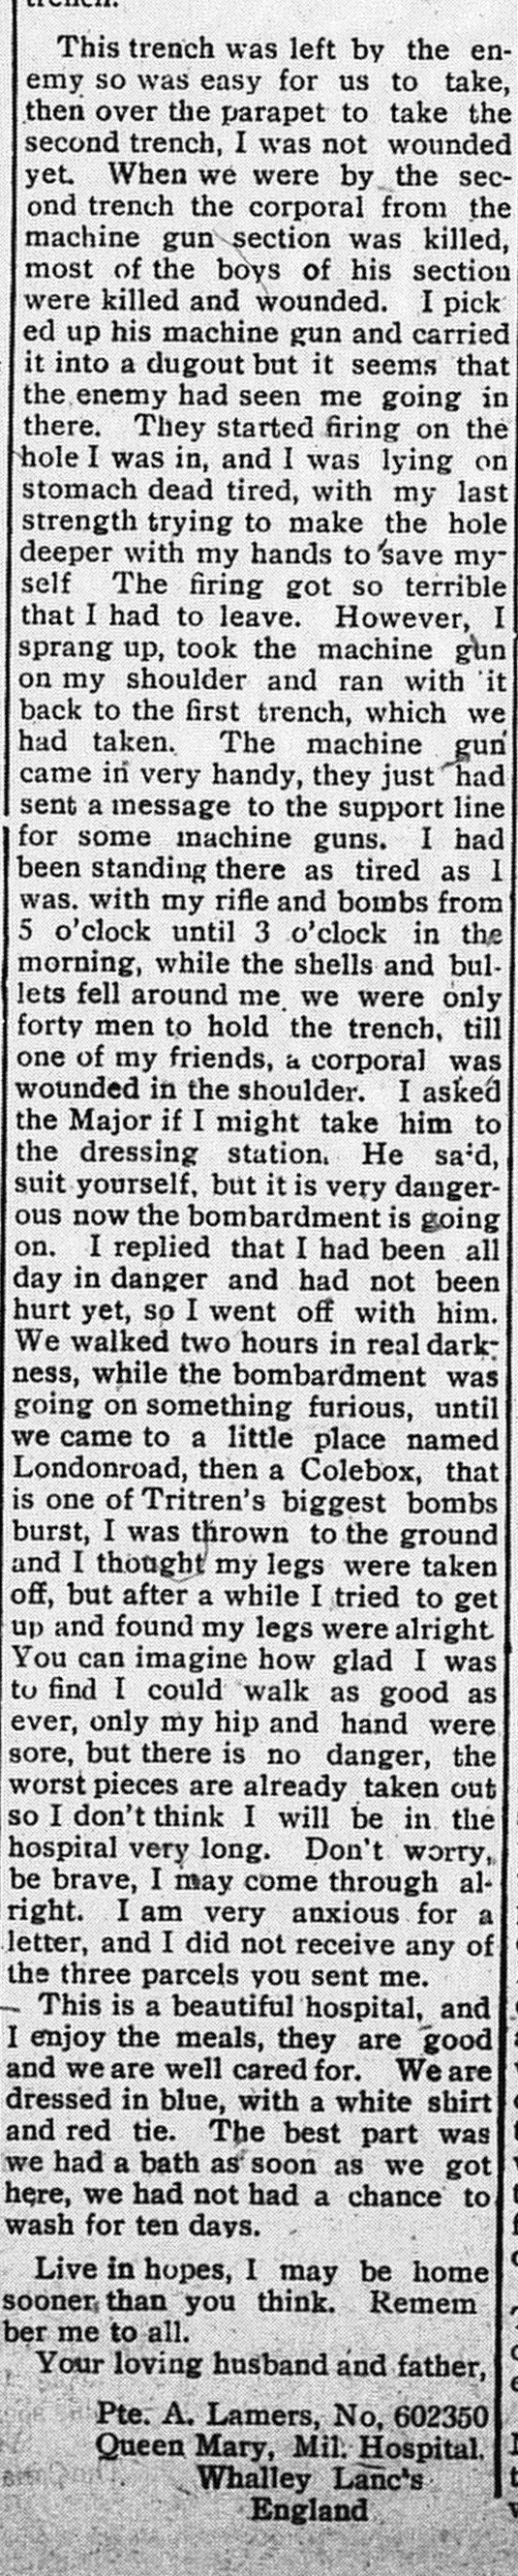 The Canadian Echo, October 25, 1916 - part 2